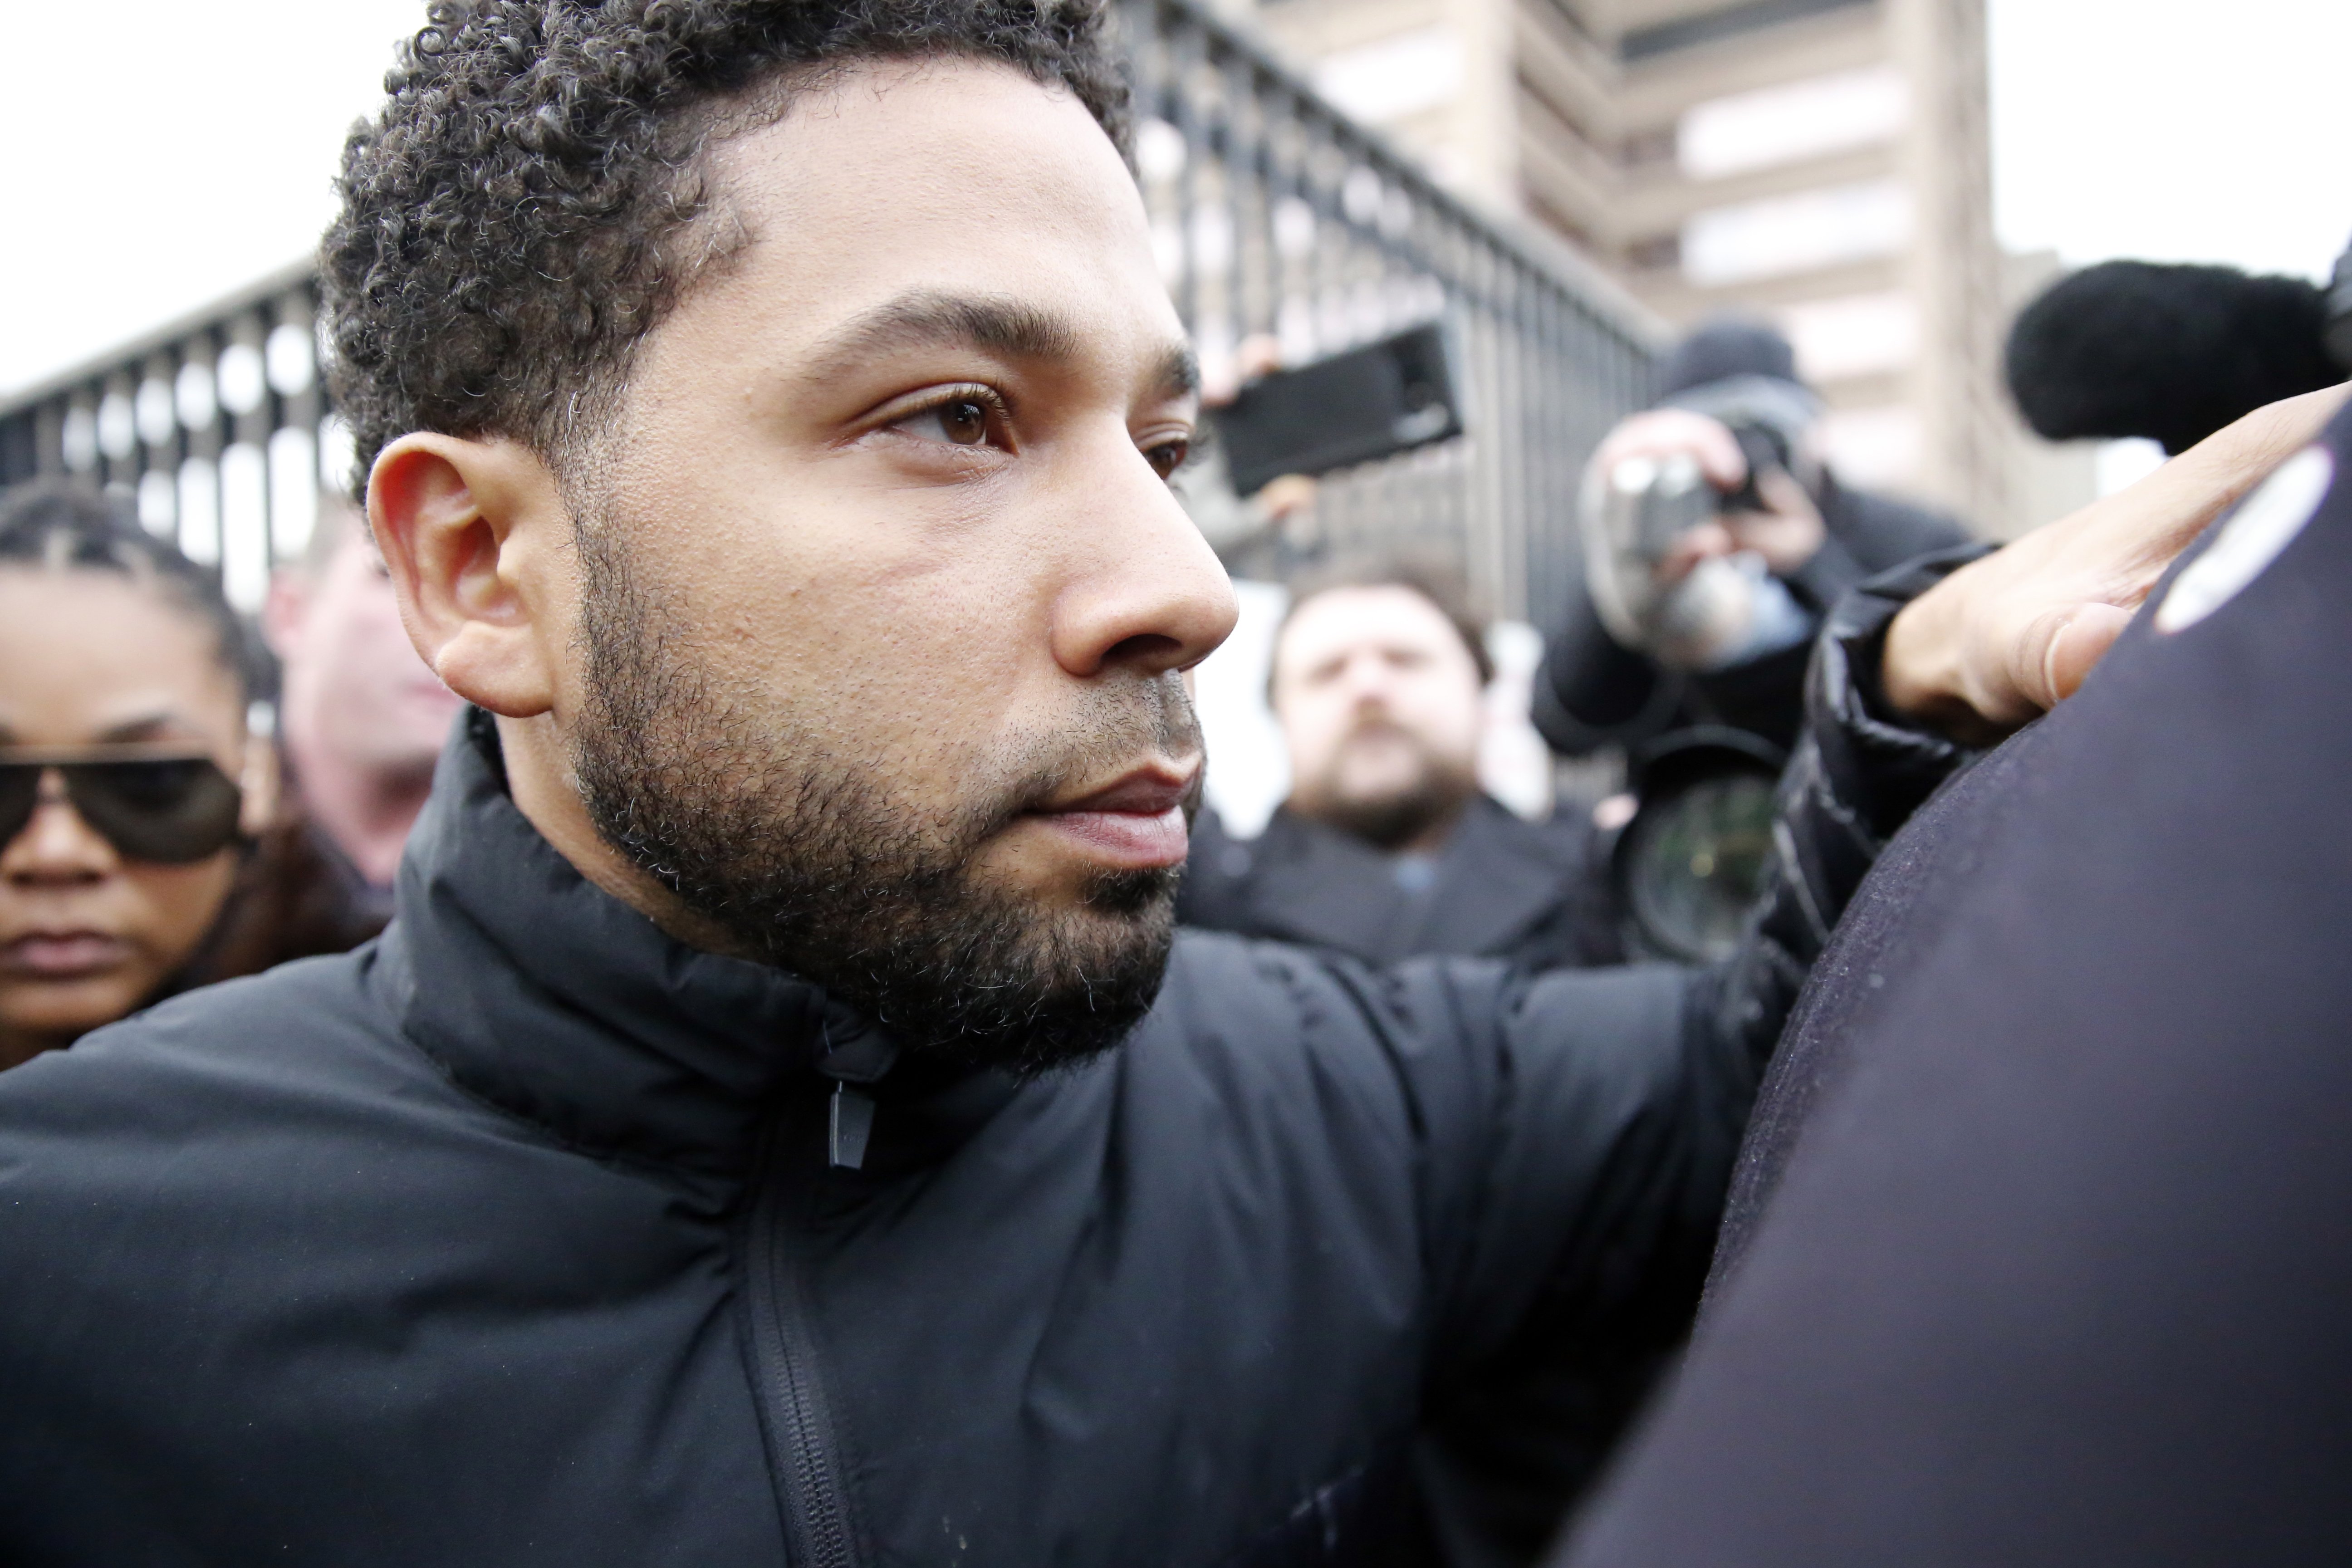 Jussie Smollett leaves Cook County jail after posting bond on February 21, 2019 in Chicago, Illinois. | Photo: GettyImages/Global Images of Ukraine